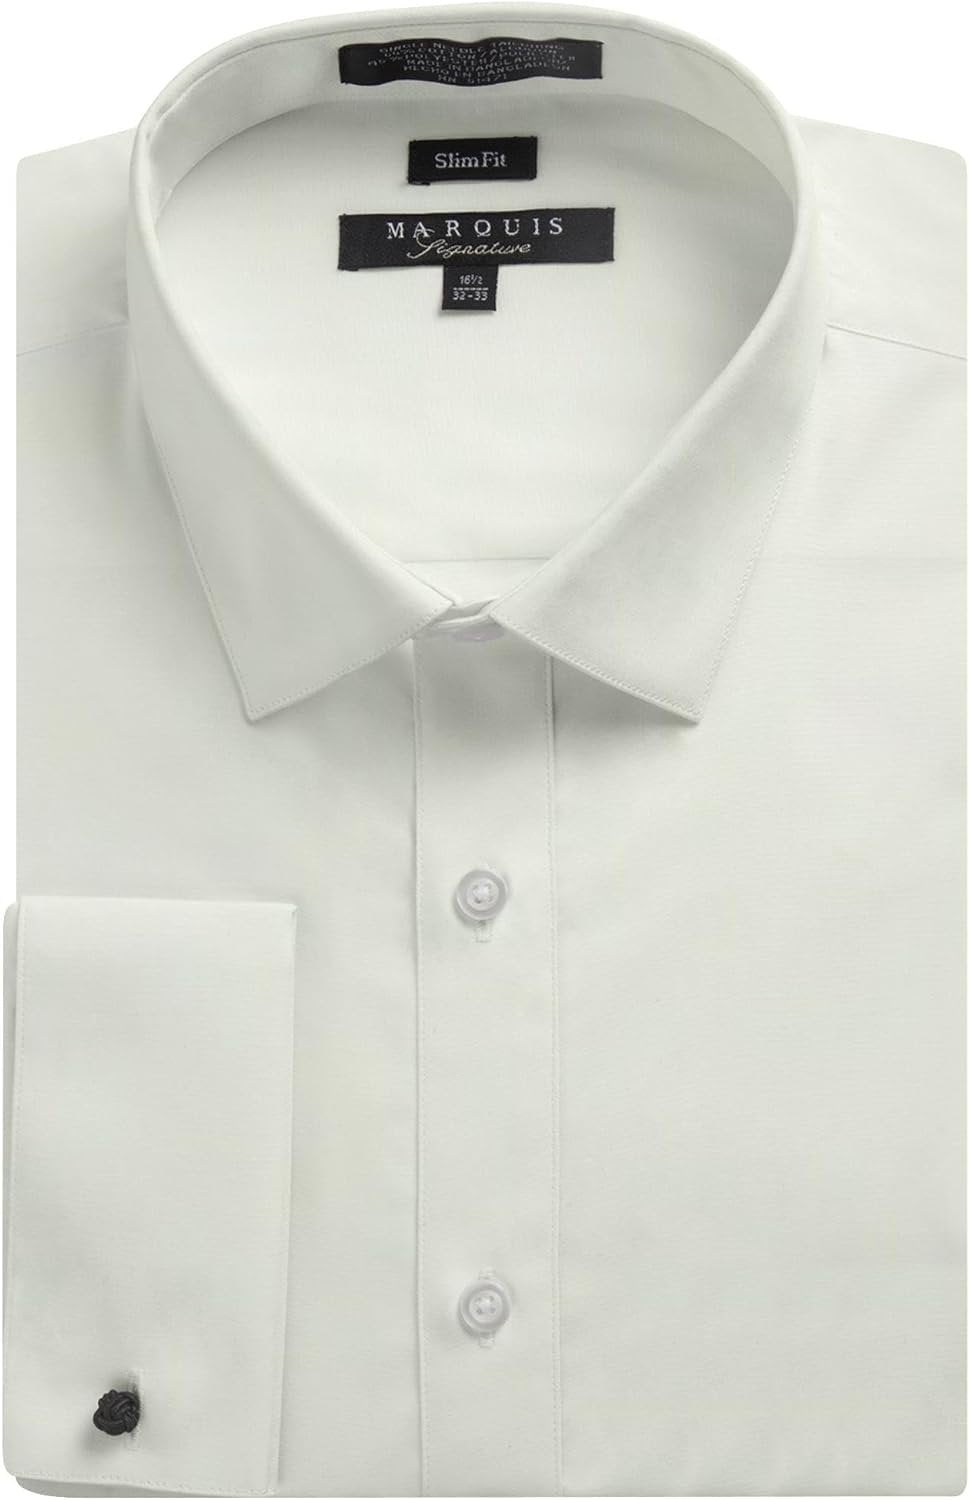 Marquis Men's Slim Fit French Cuff Cotton Blend Solid Dress Shirt